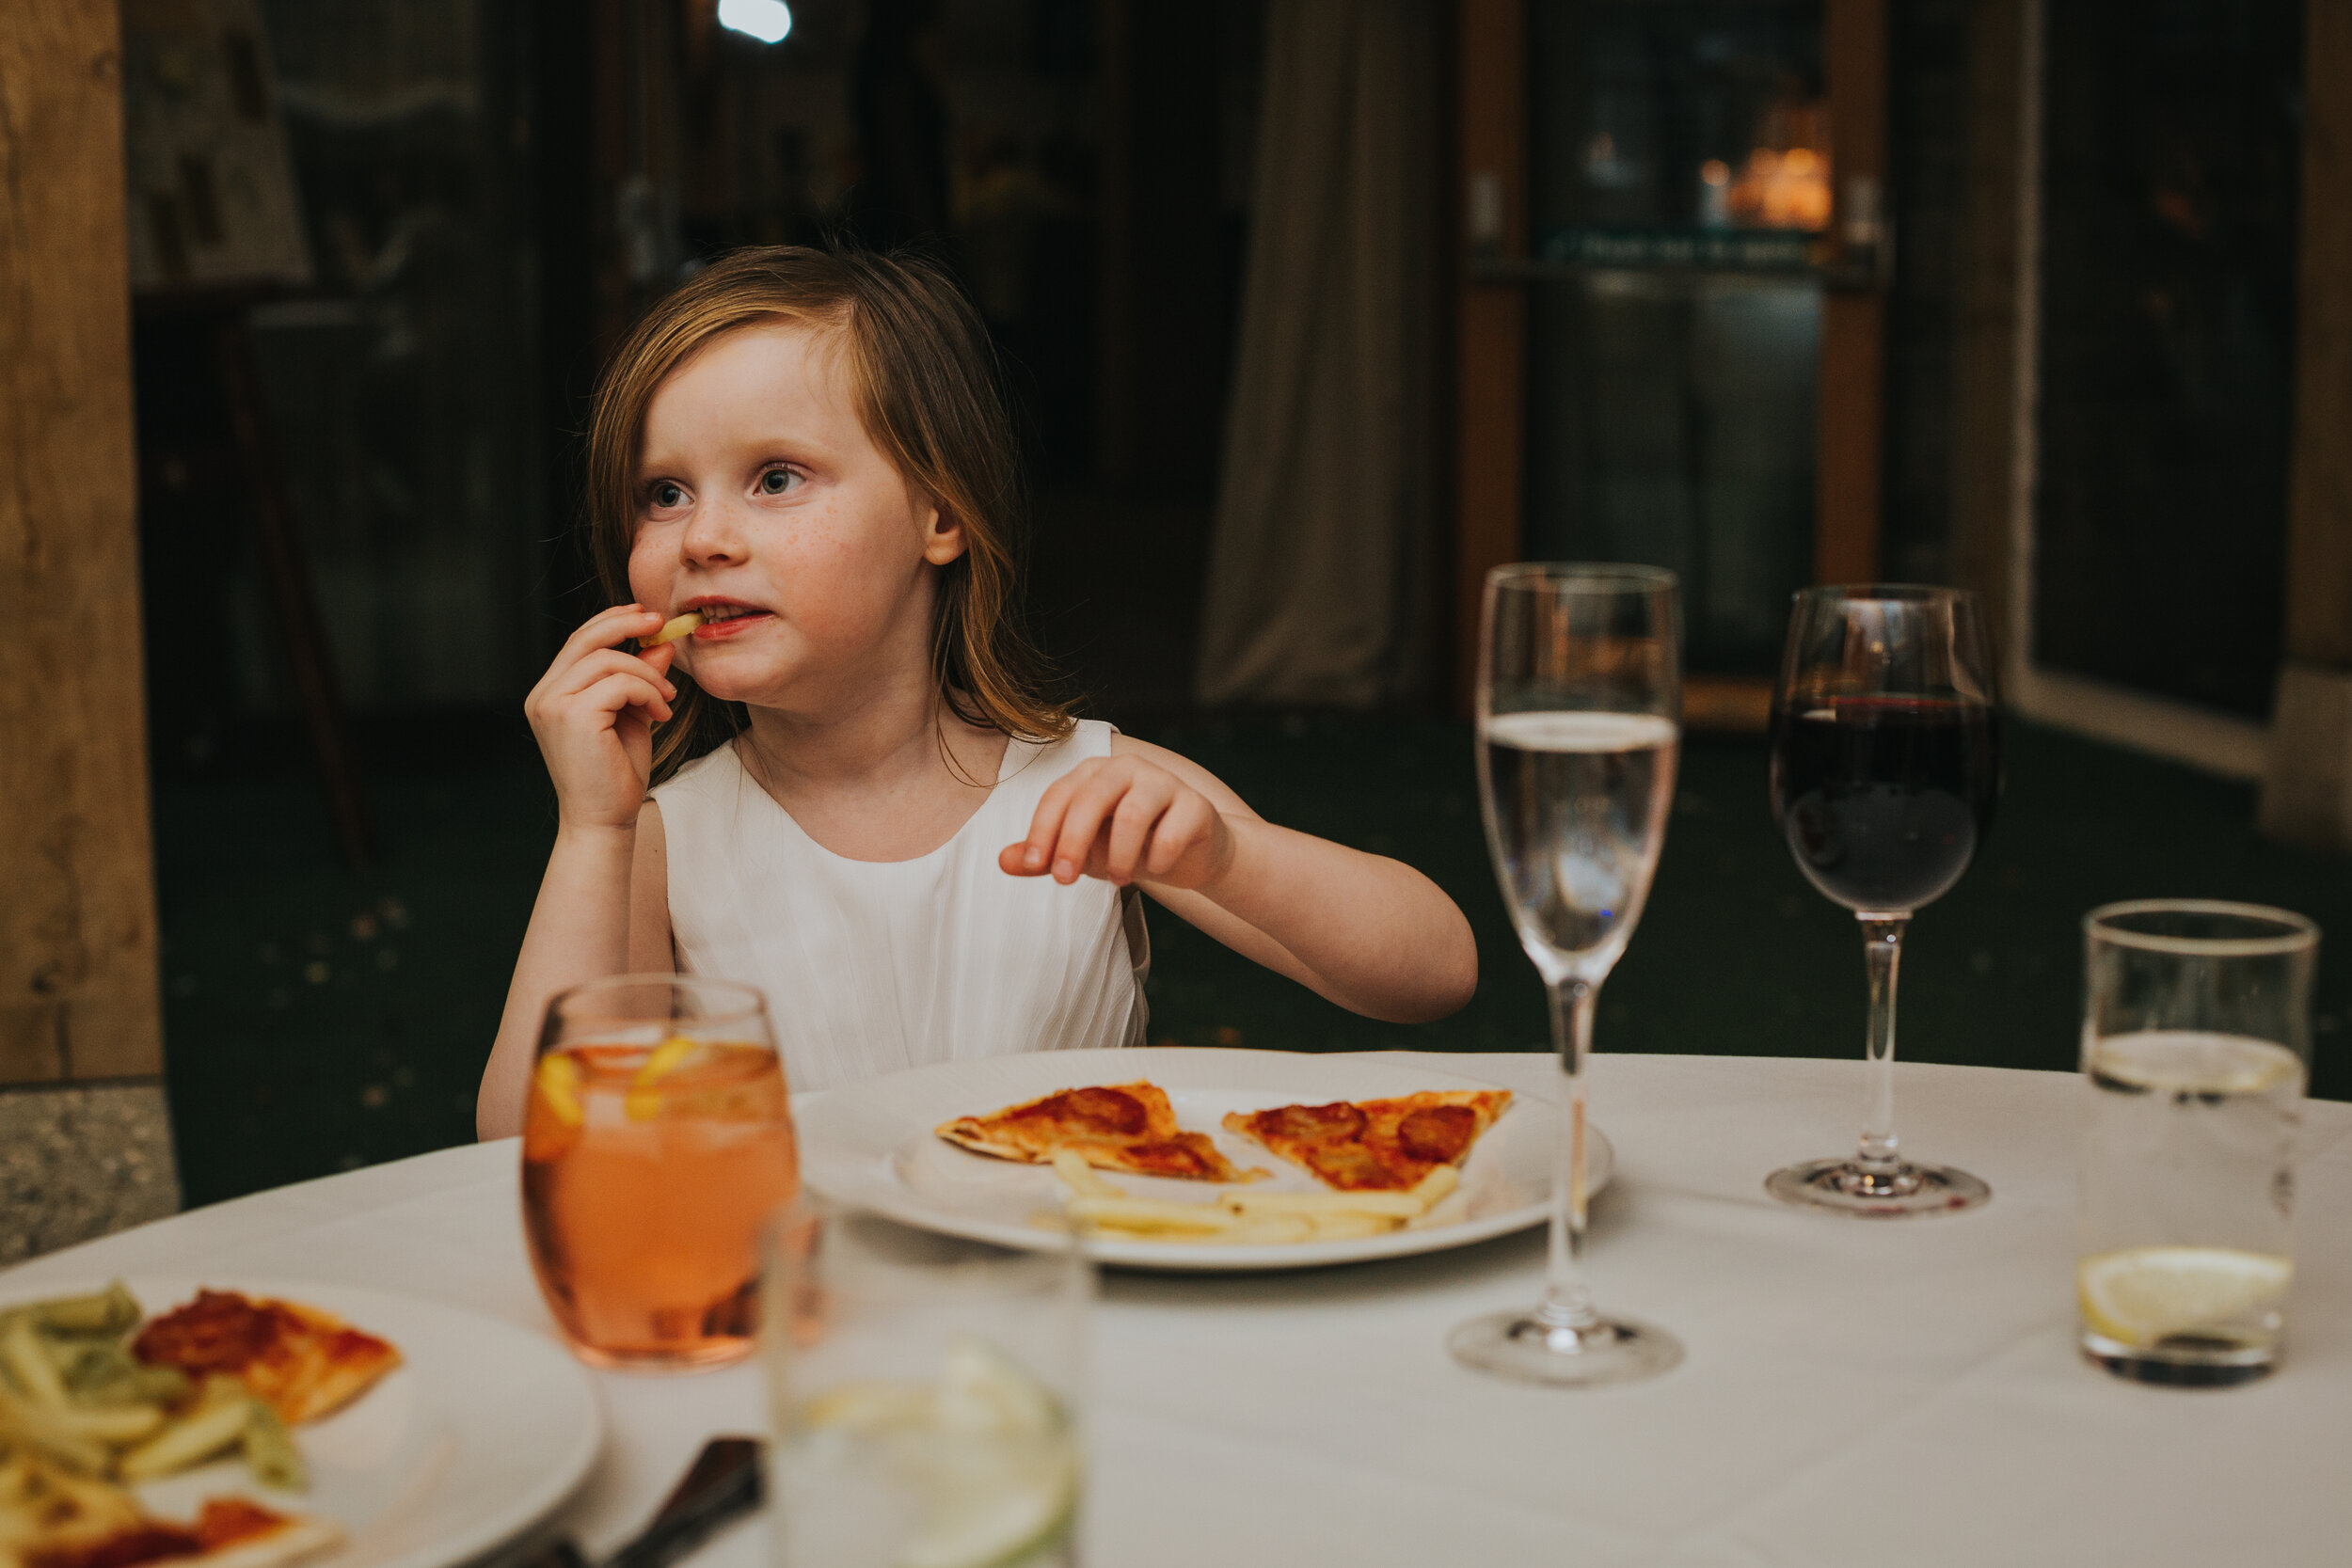 Child eating pizza. 